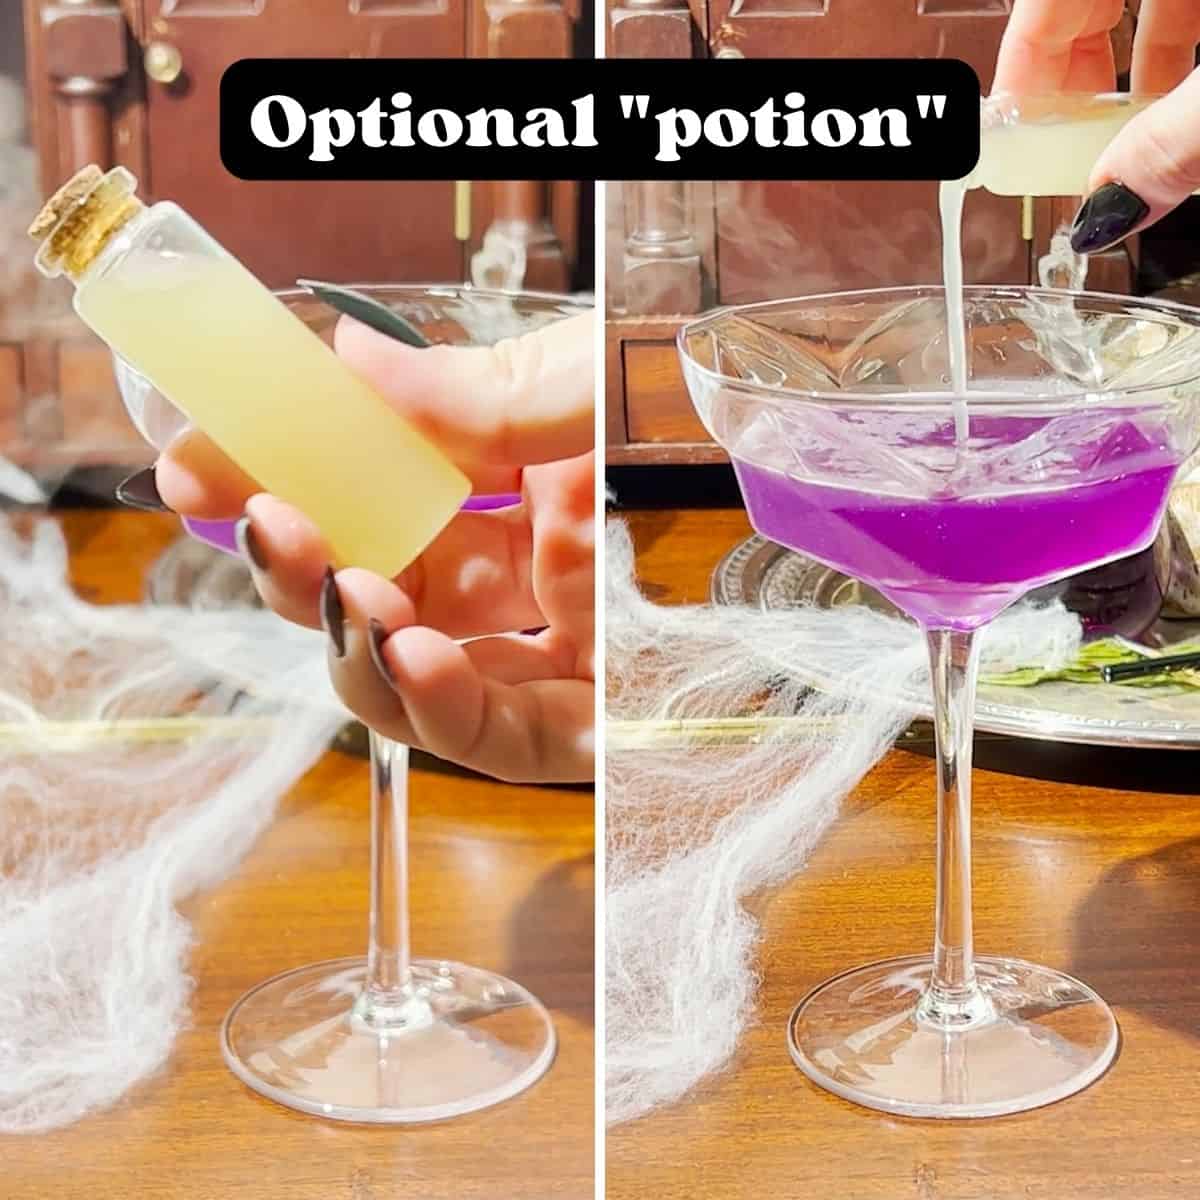 A vial of lemon juice being shown then poured into the cocktail - the text overlay reads "optional: "potion"".